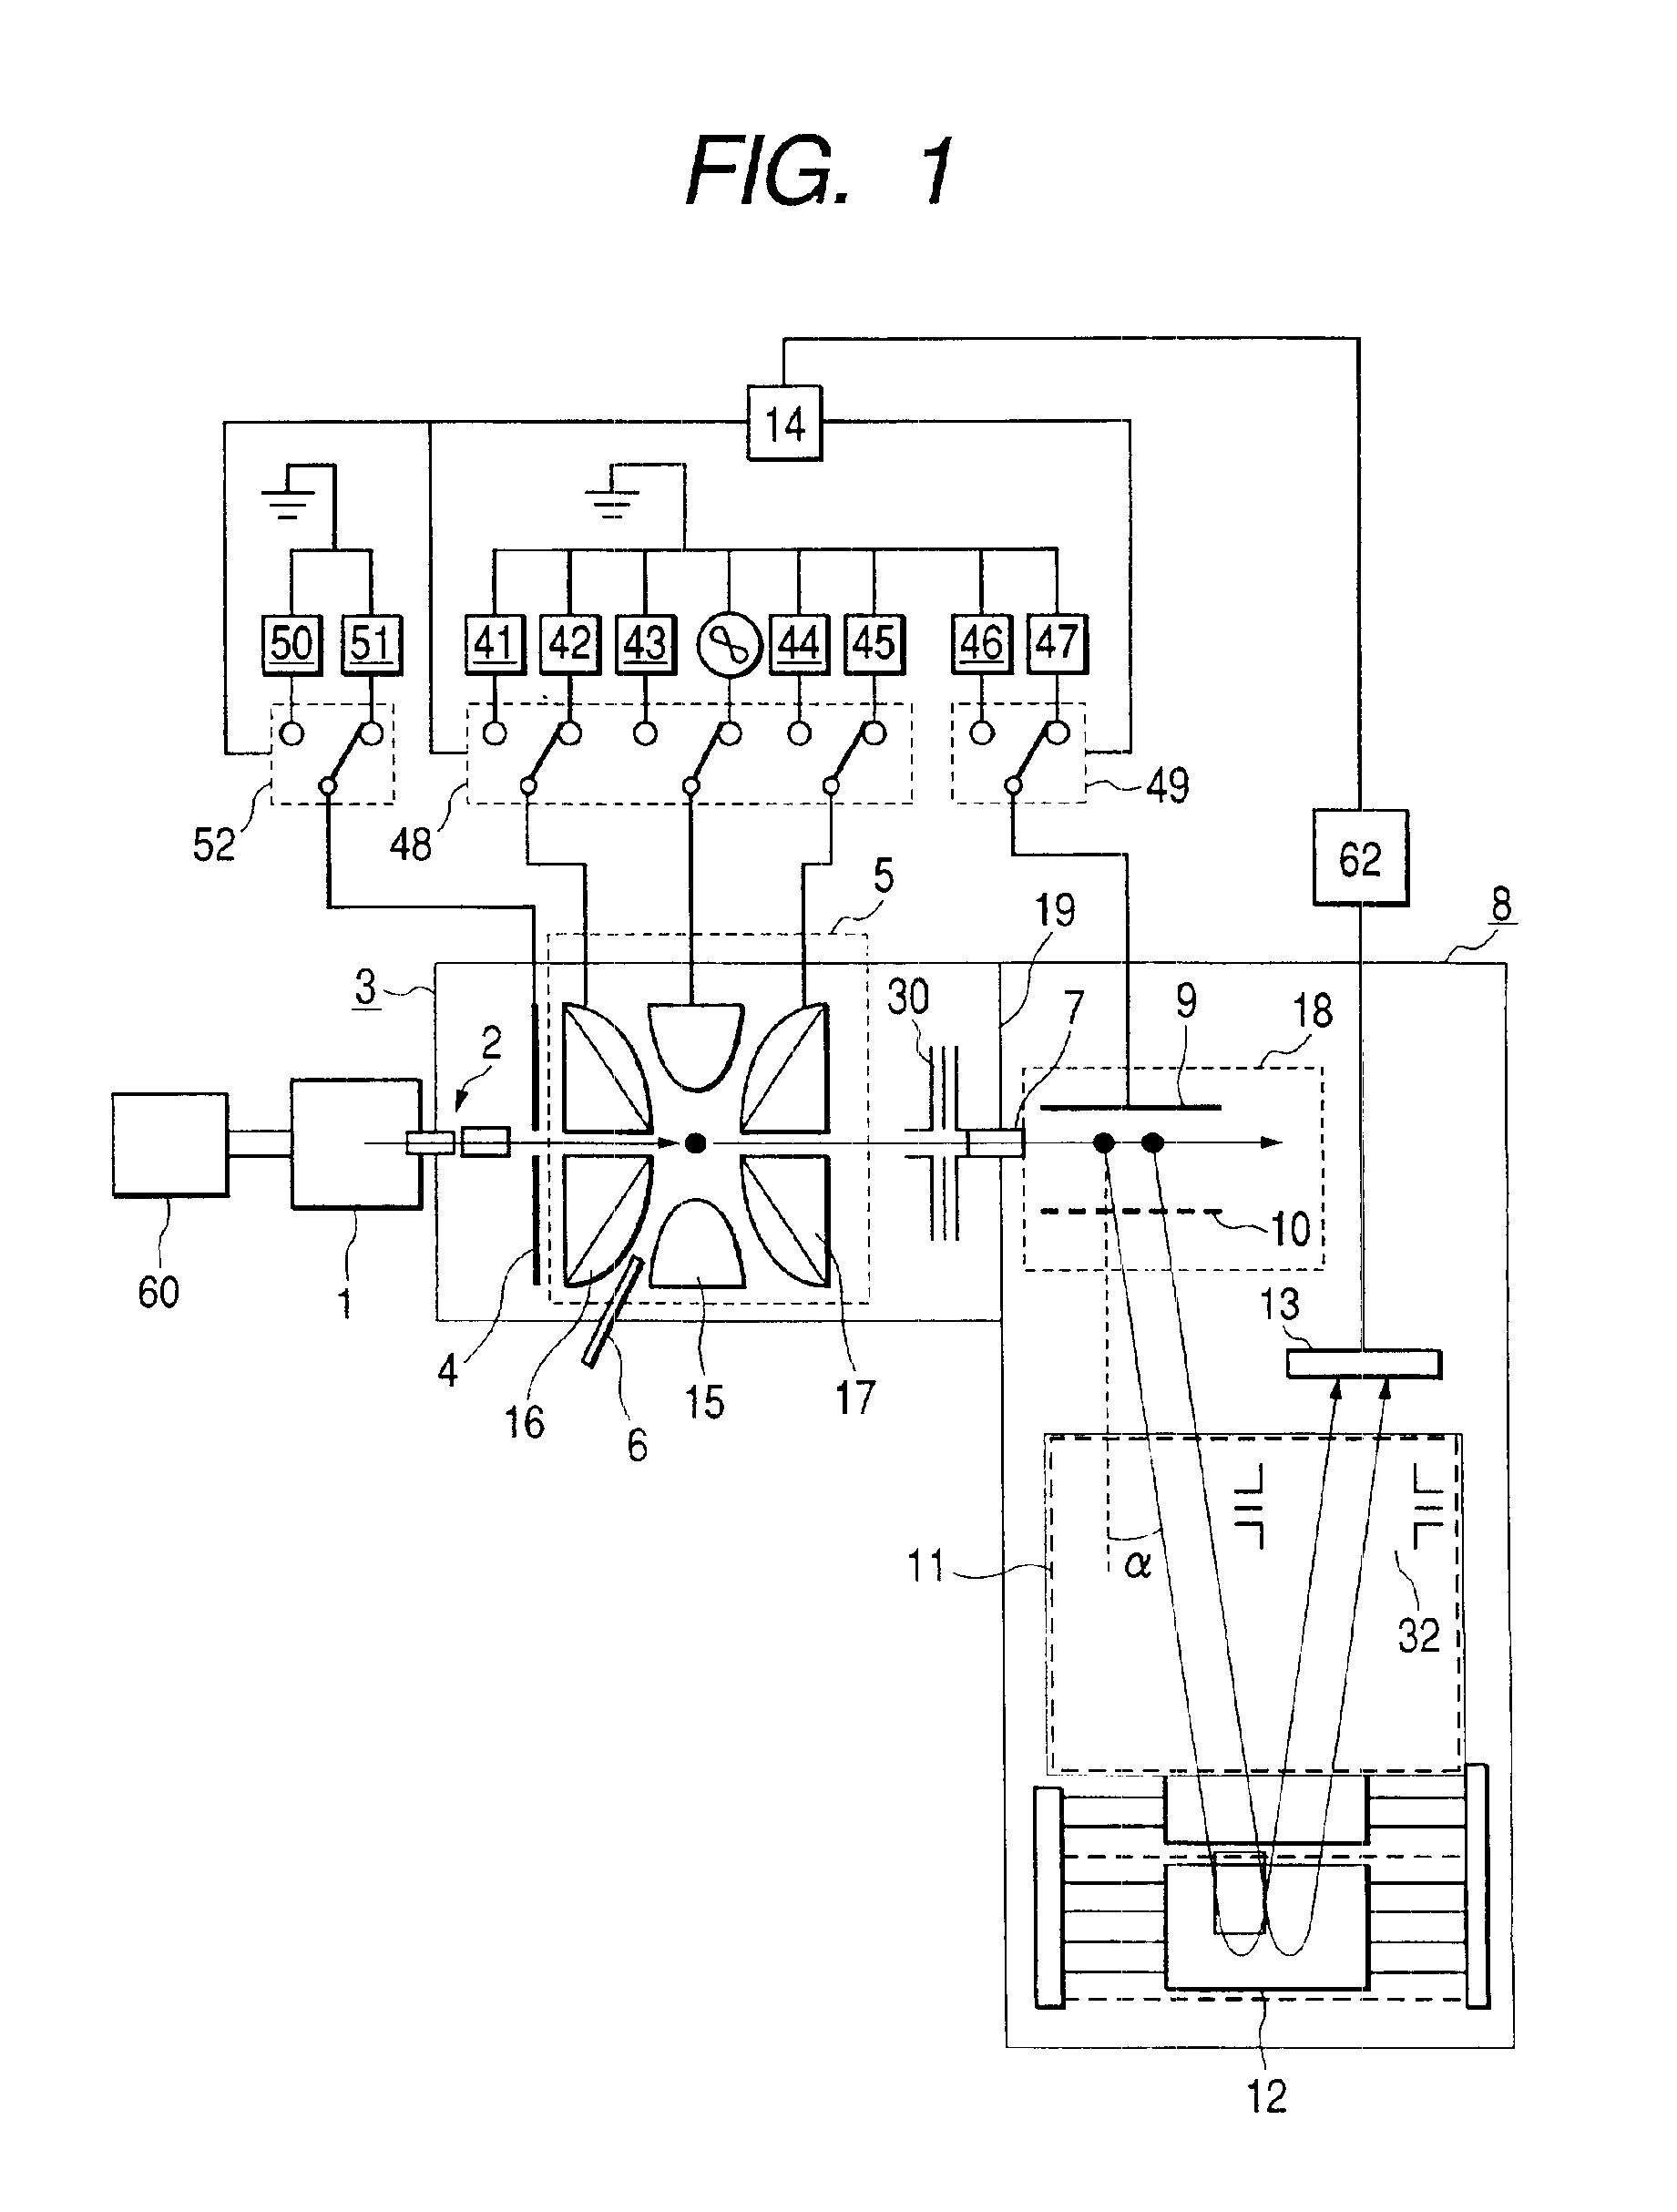 Mass spectrometer and measurement system using the mass spectrometer